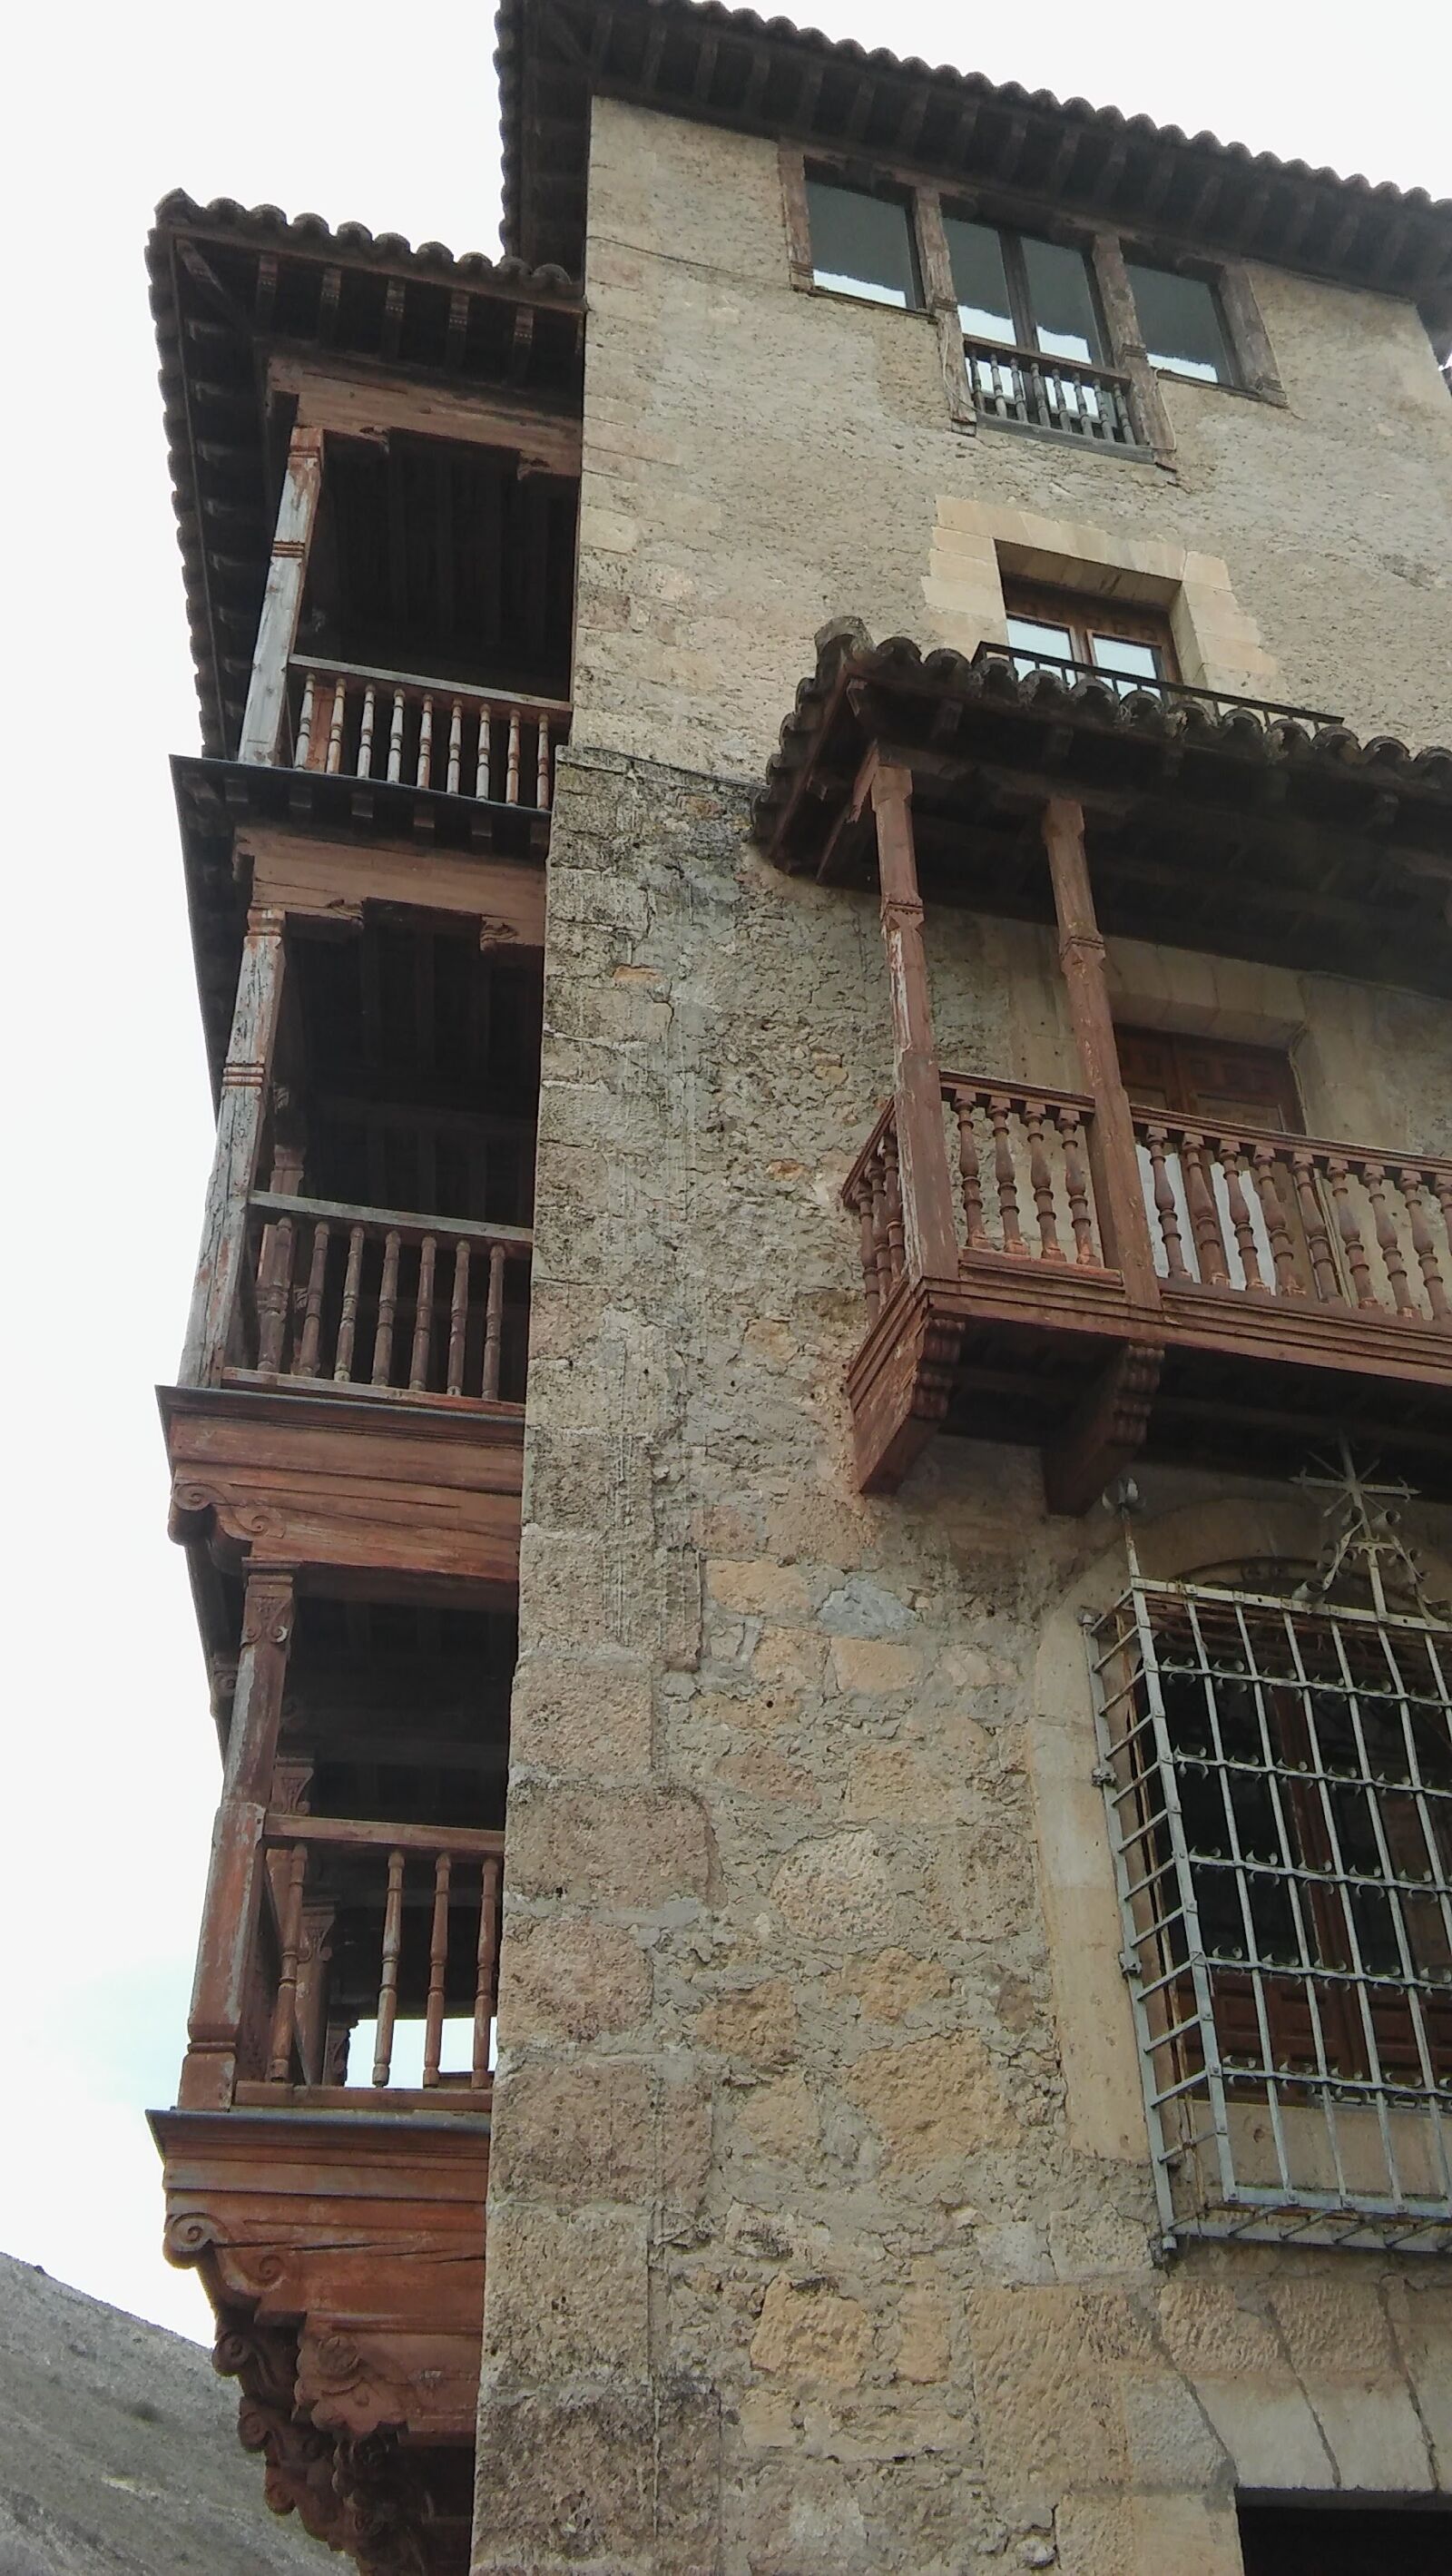 LG G4C sample photo. Hanging houses of cuenca photography